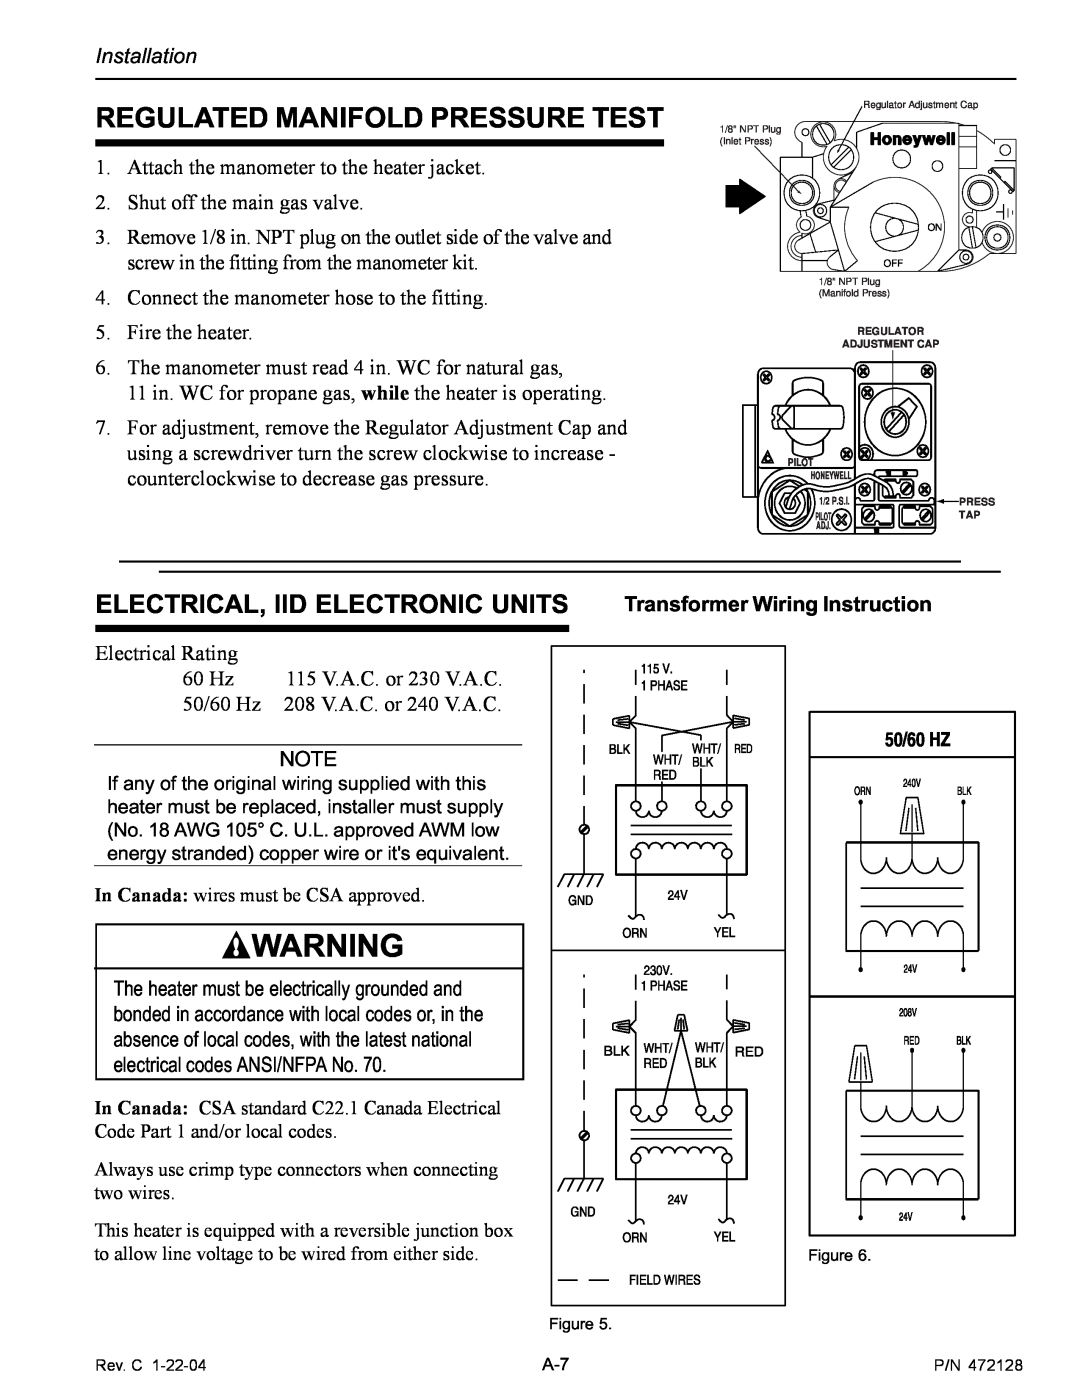 Pentair CH installation manual Regulated Manifold Pressure Test, Electrical, Iid Electronic Units 